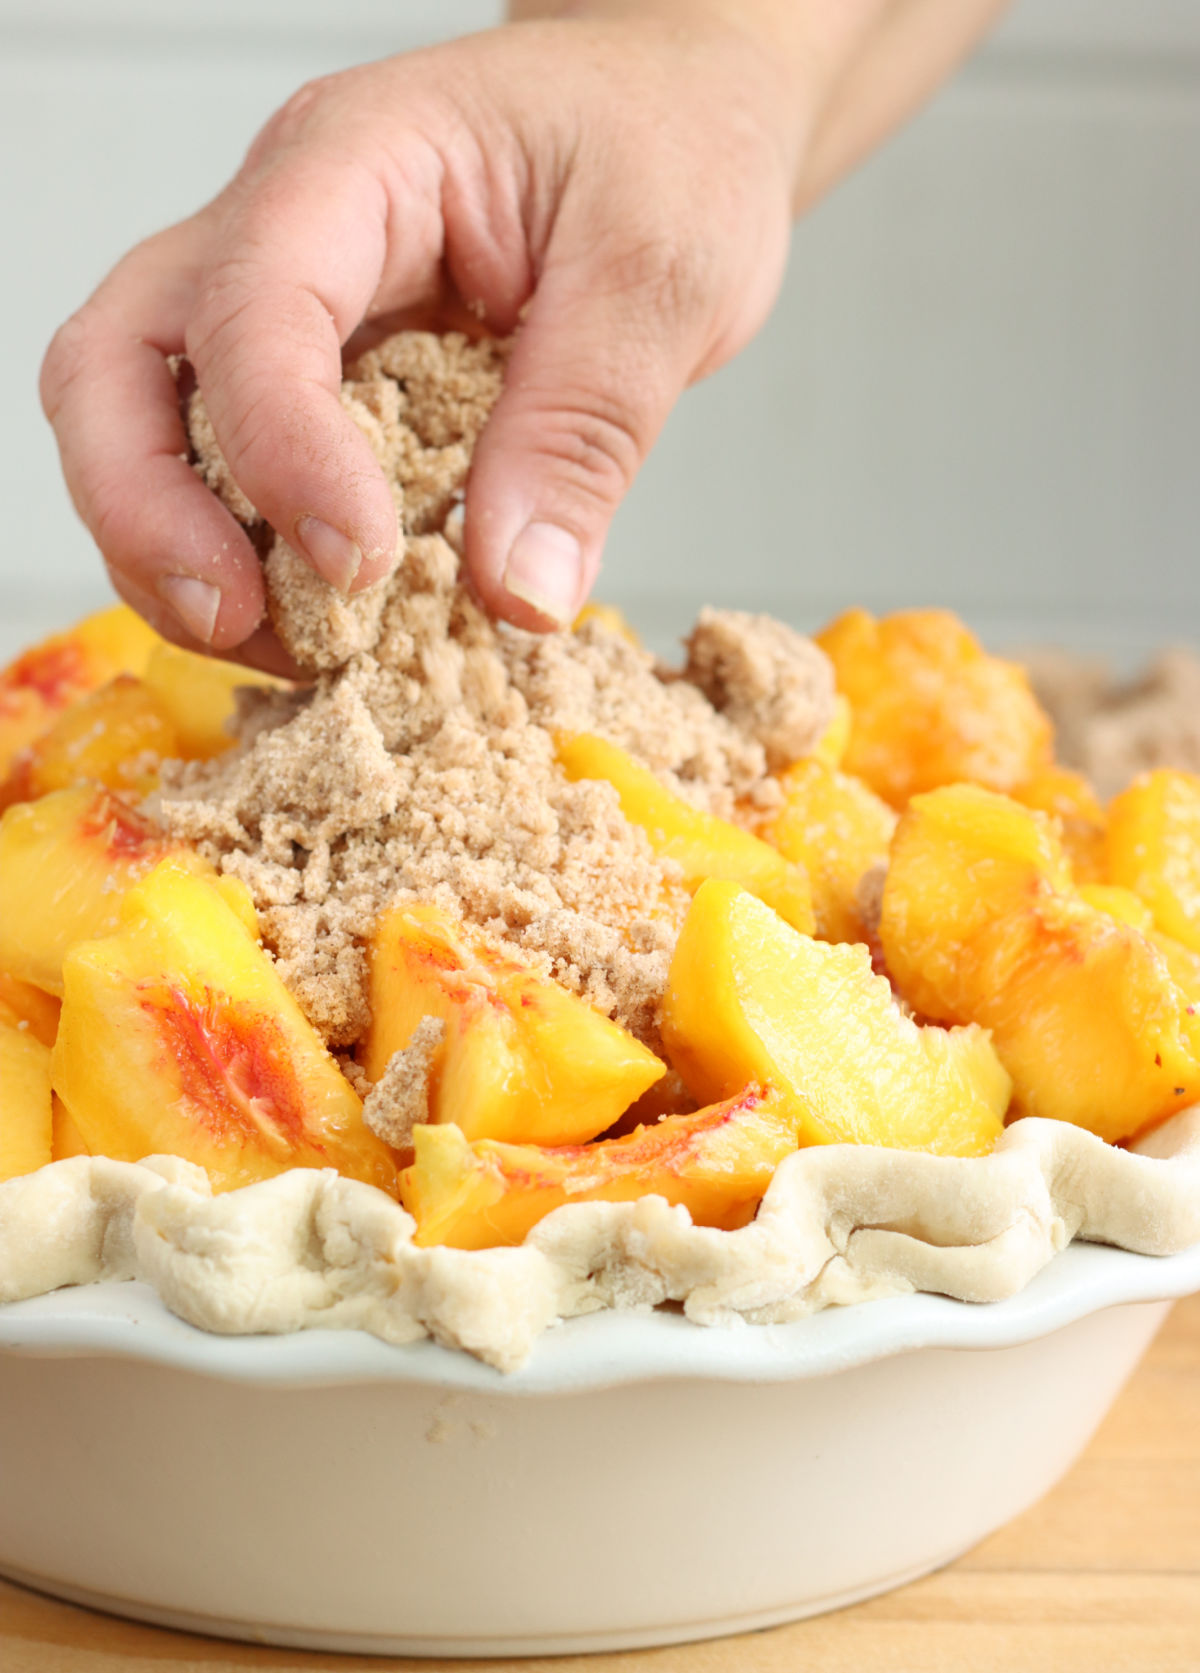 Hand putting crumble topping on peach pie of unbaked pie.